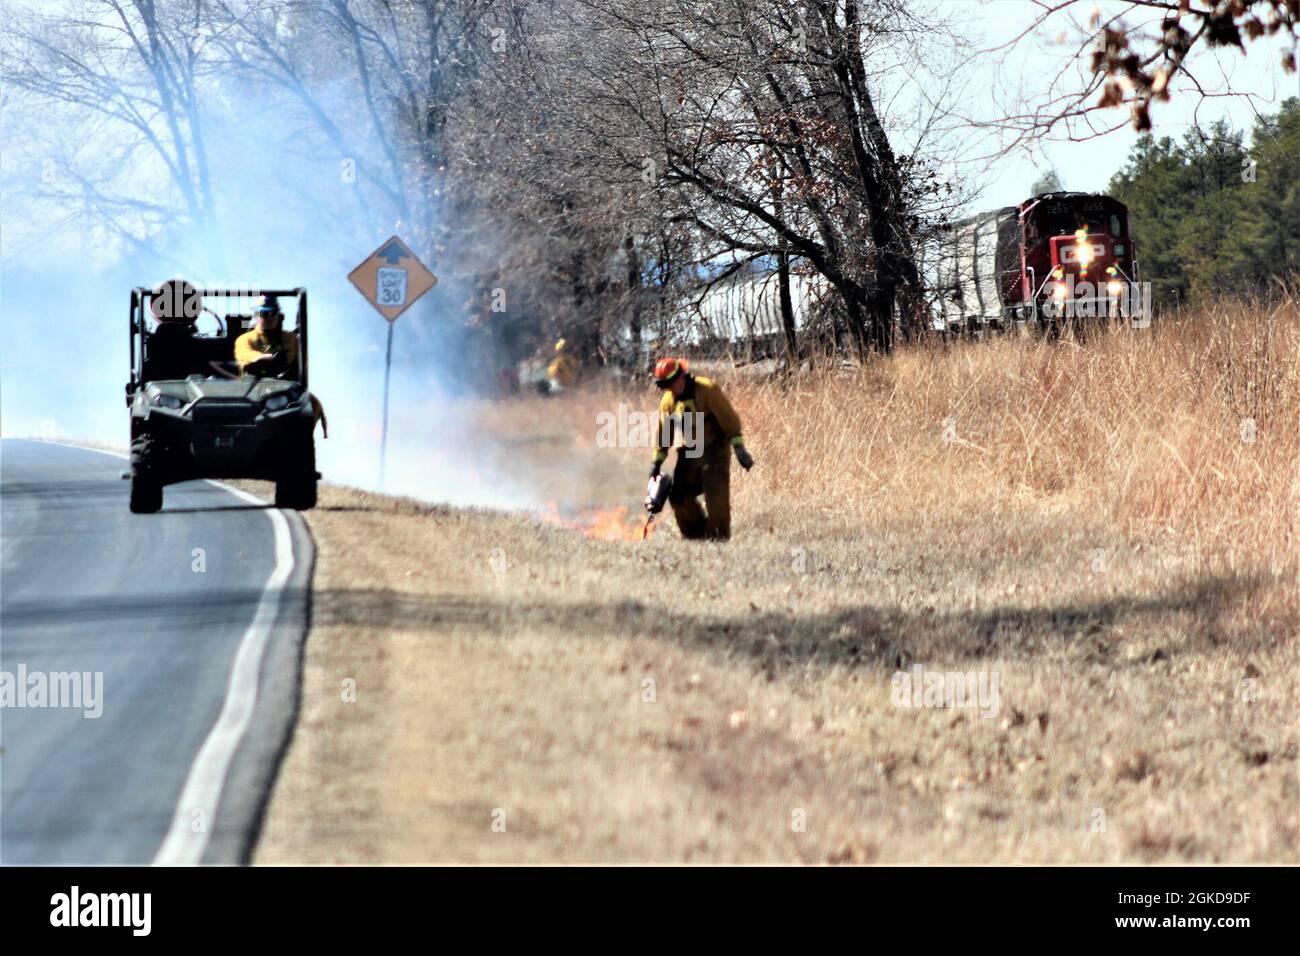 Forestry Technician Tim Parry lights a prescribed burn March 18, 2021, along the railroad tracks on South Post at Fort McCoy, Wis. The post prescribed burn team includes personnel with the Fort McCoy Directorate of Emergency Services Fire Department; Directorate of Public Works (DPW) Environmental Division Natural Resources Branch; Directorate of Plans, Training, Mobilization and Security; and the Colorado State University Center for Environmental Management of Military Lands, under contract with the post. Prescribed burns also improve wildlife habitat, control invasive plant species, restore Stock Photo